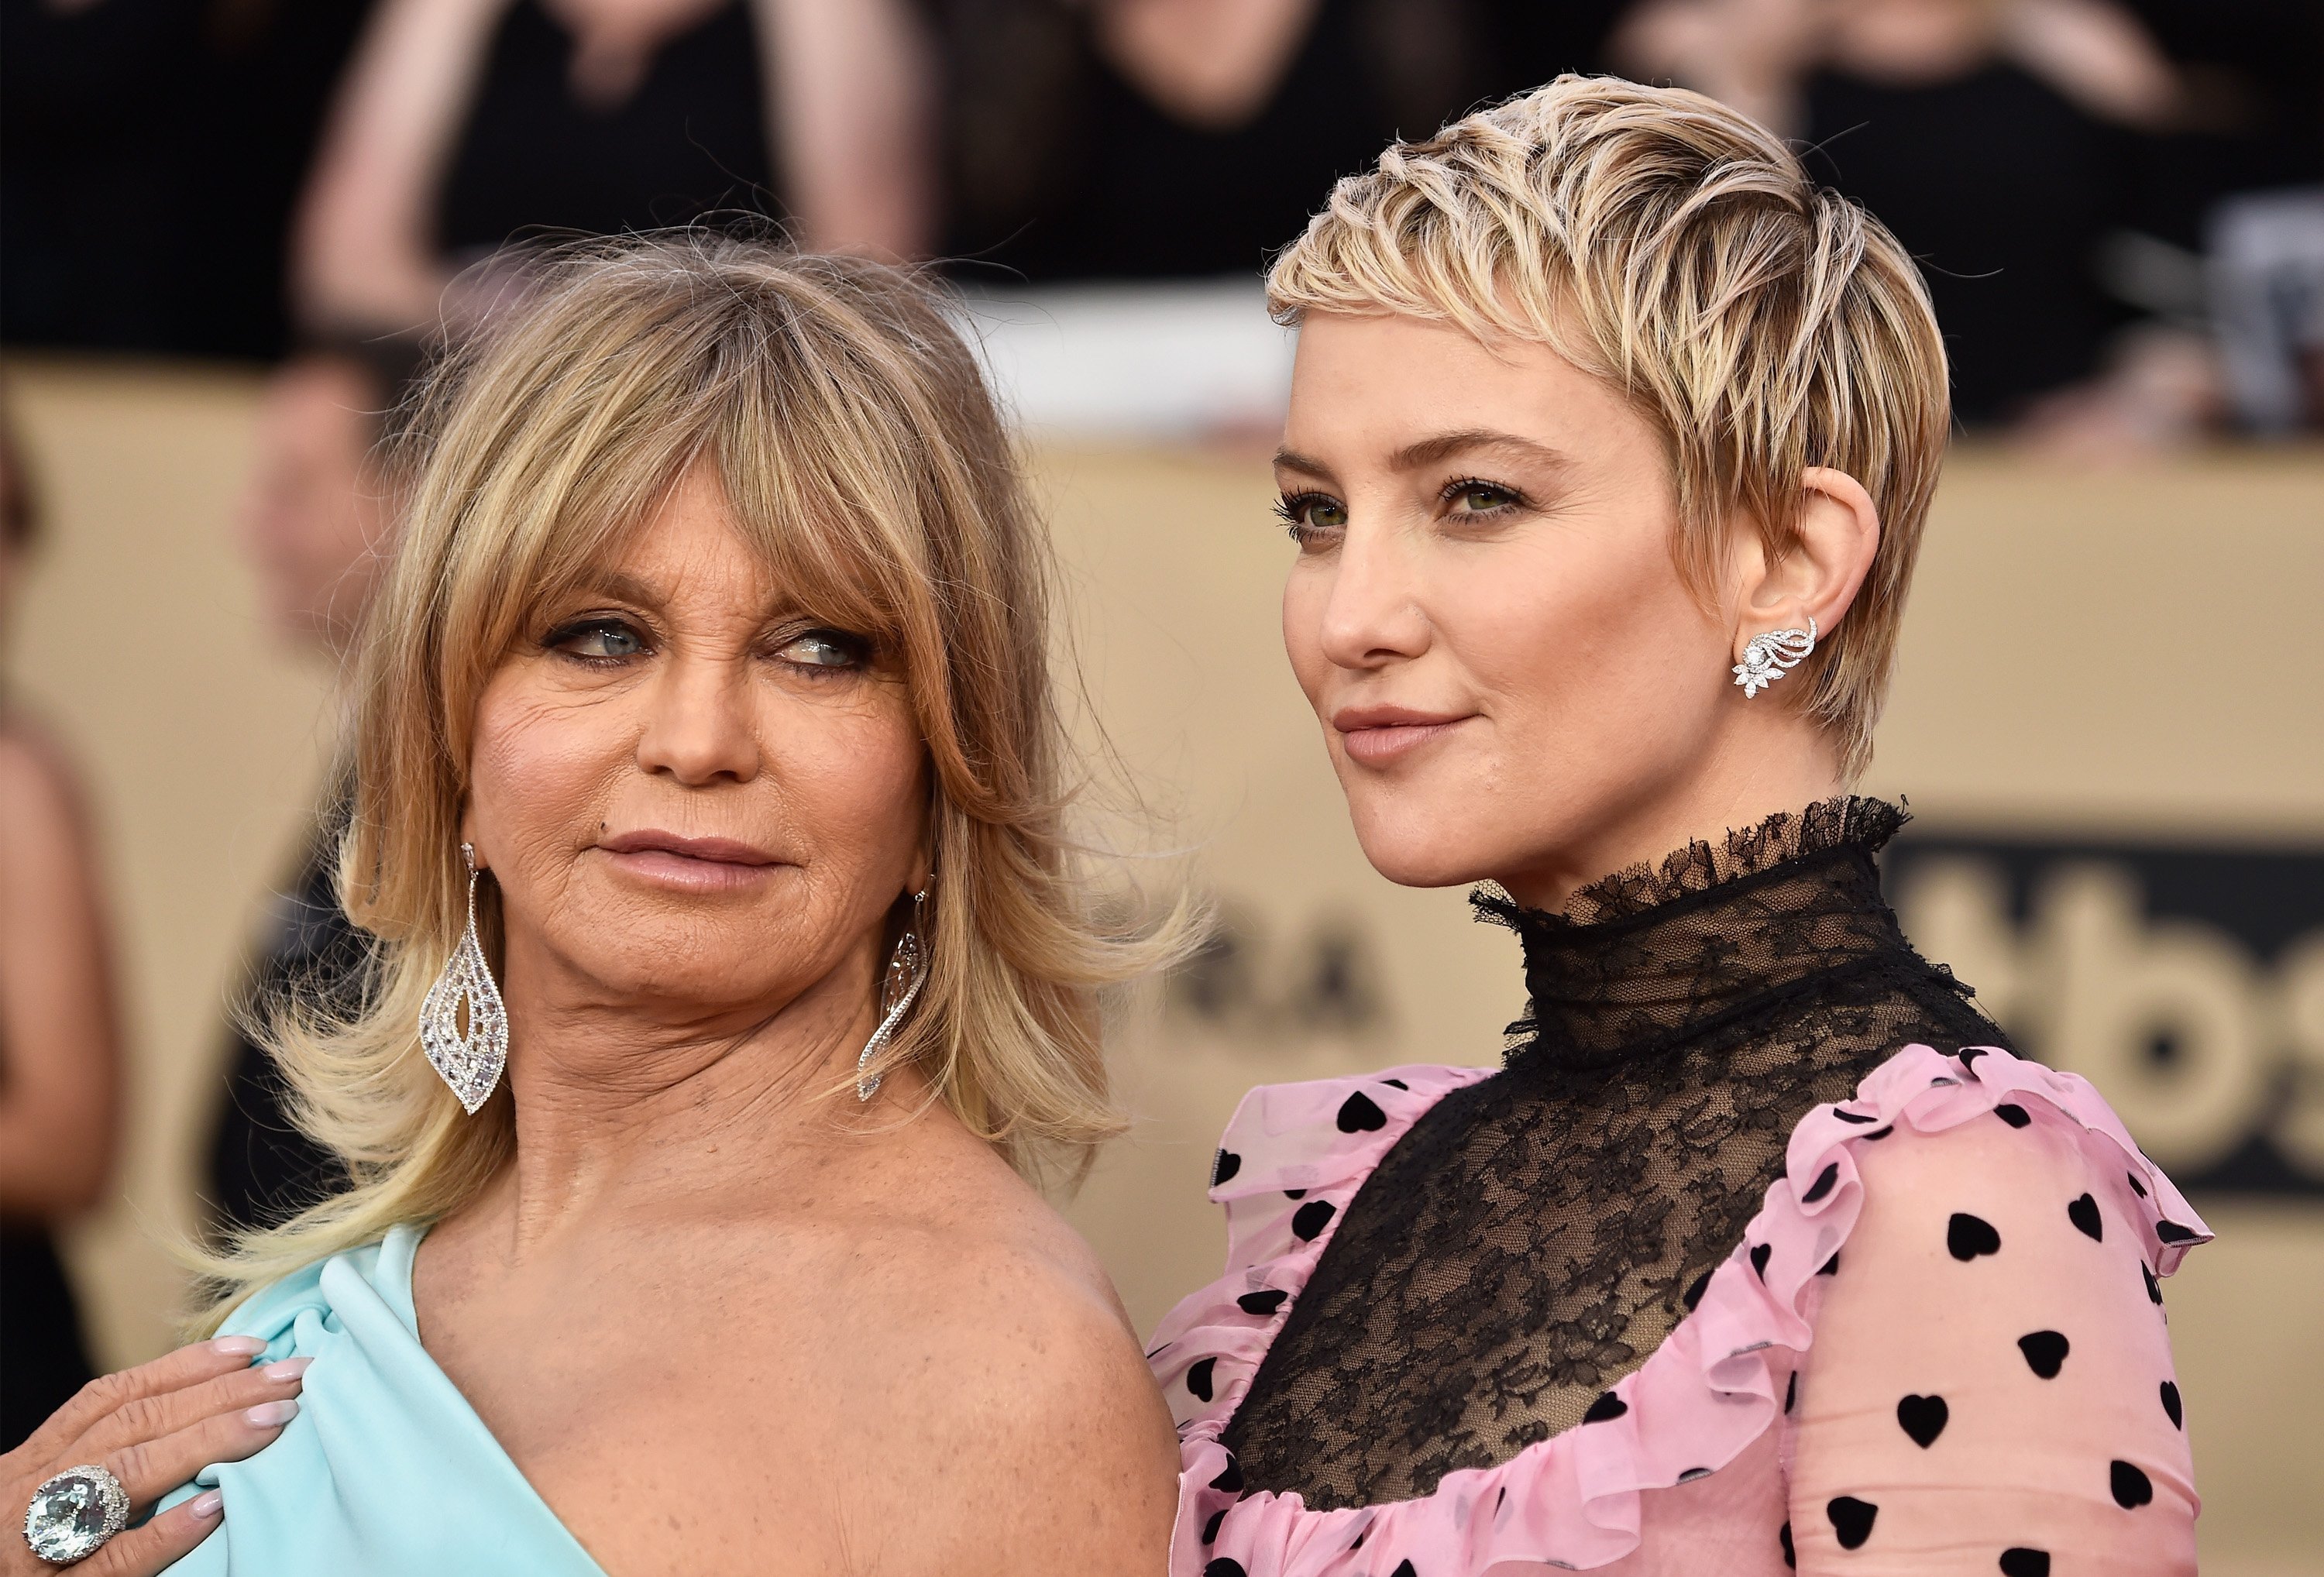 Goldie Hawn and Kate Hudson attend the Annual Screen Actor's Guild Awards in Los Angeles, California on January 21, 2018 | Photo: Getty Images